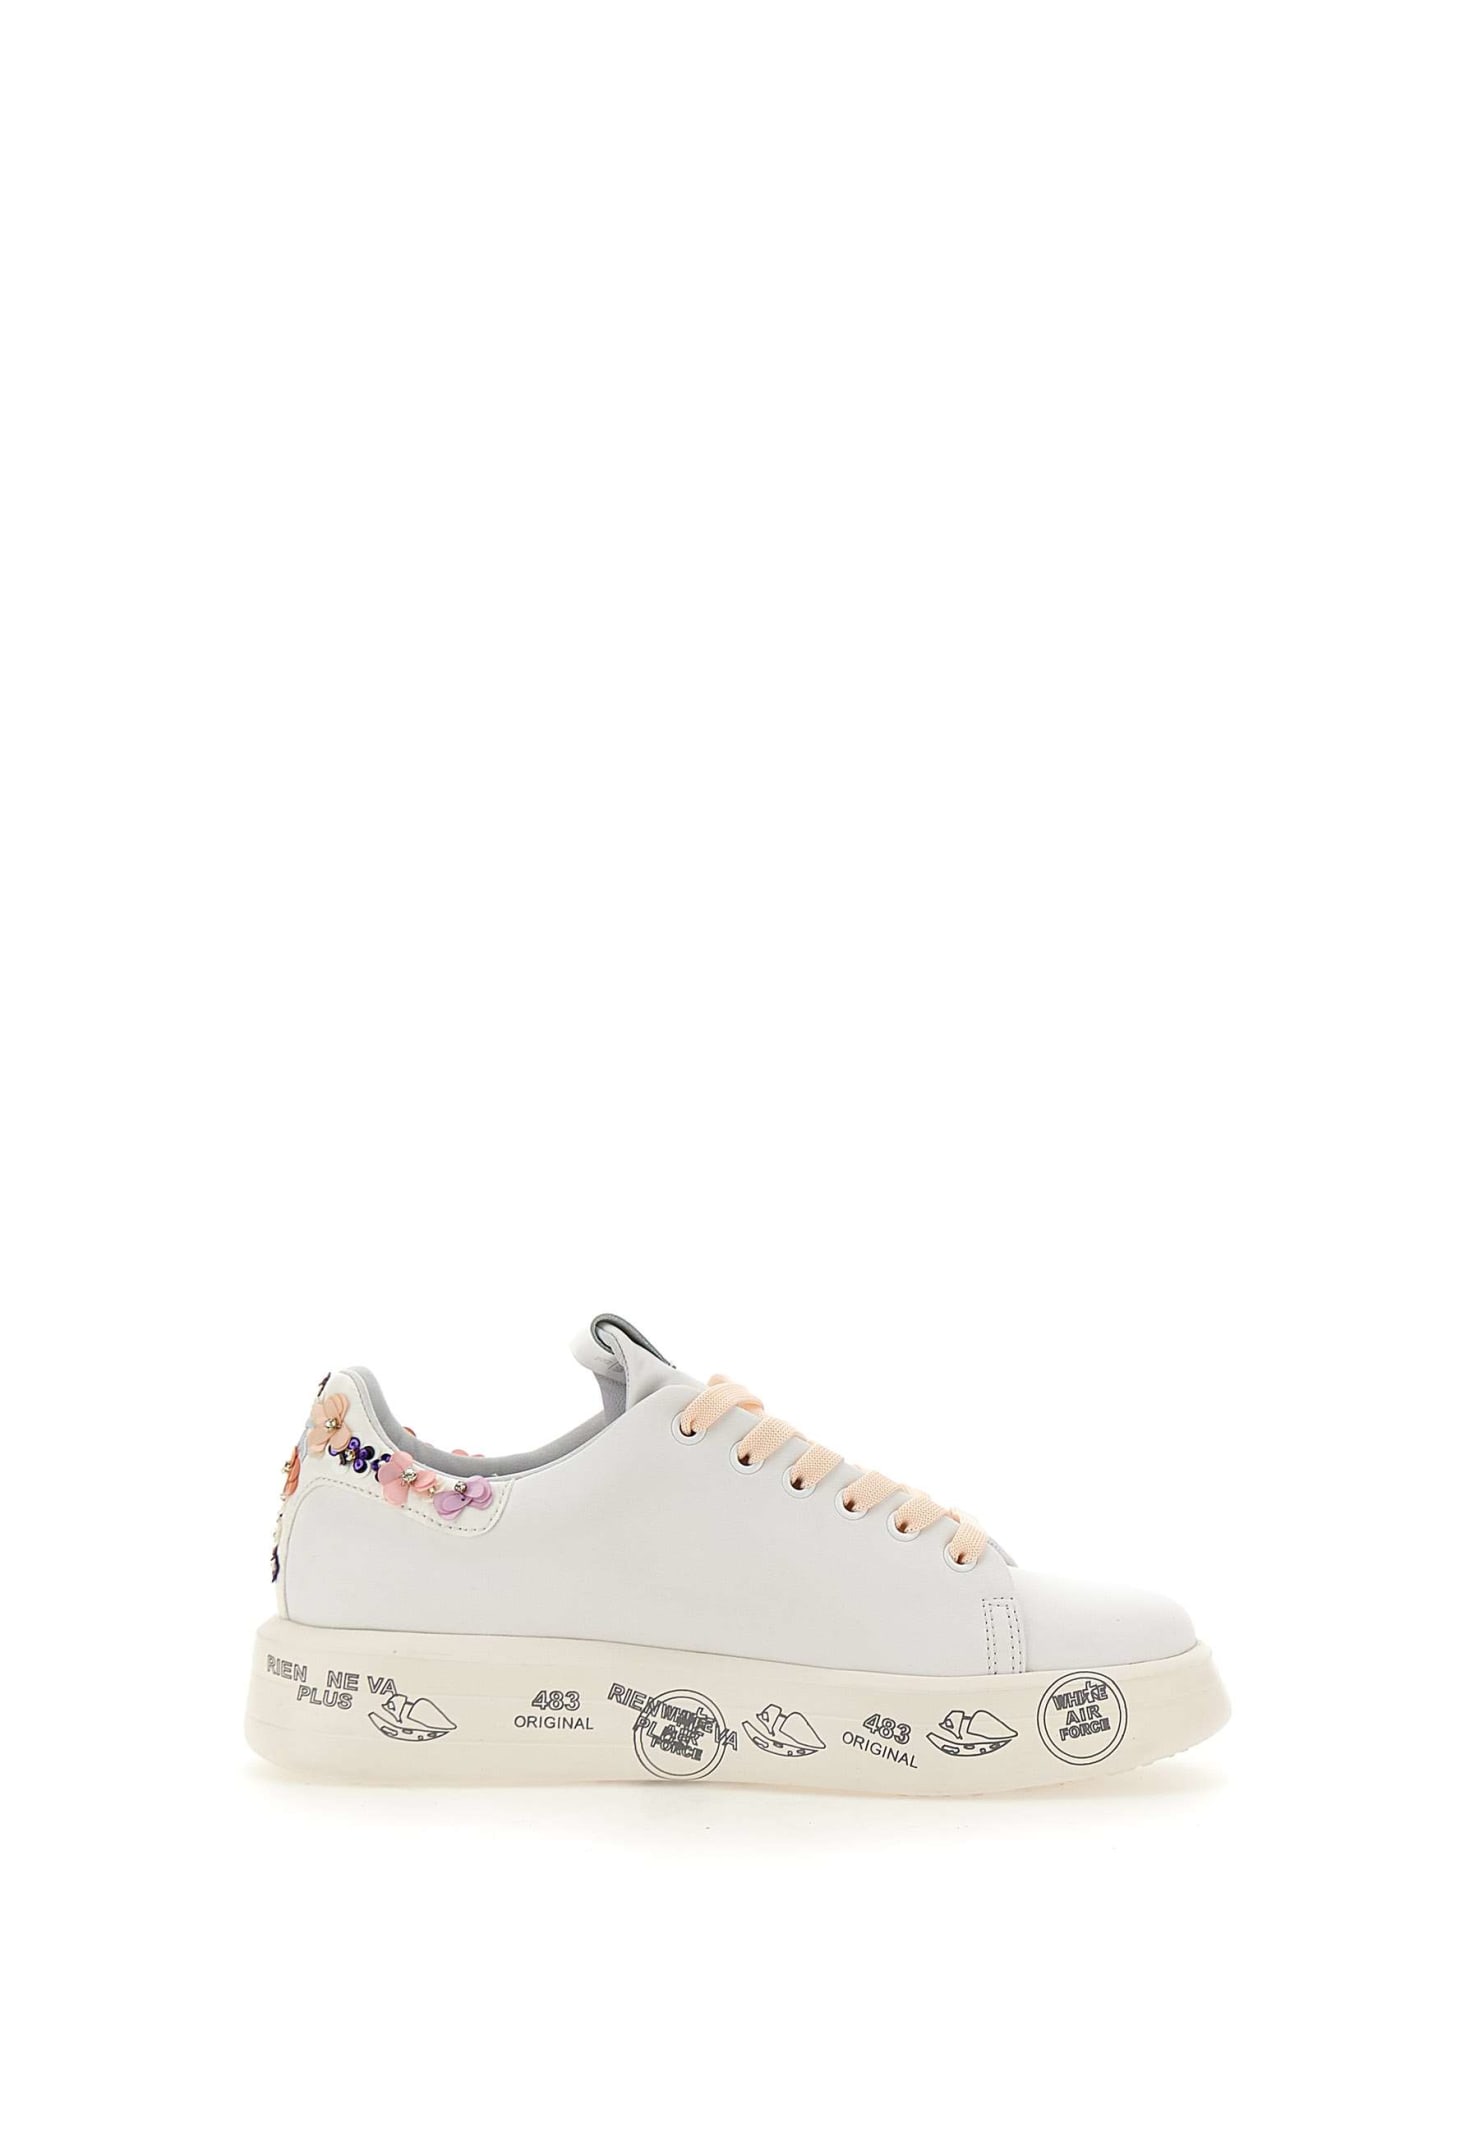 Shop Premiata Belle6709 Leather Sneakers In White/pink